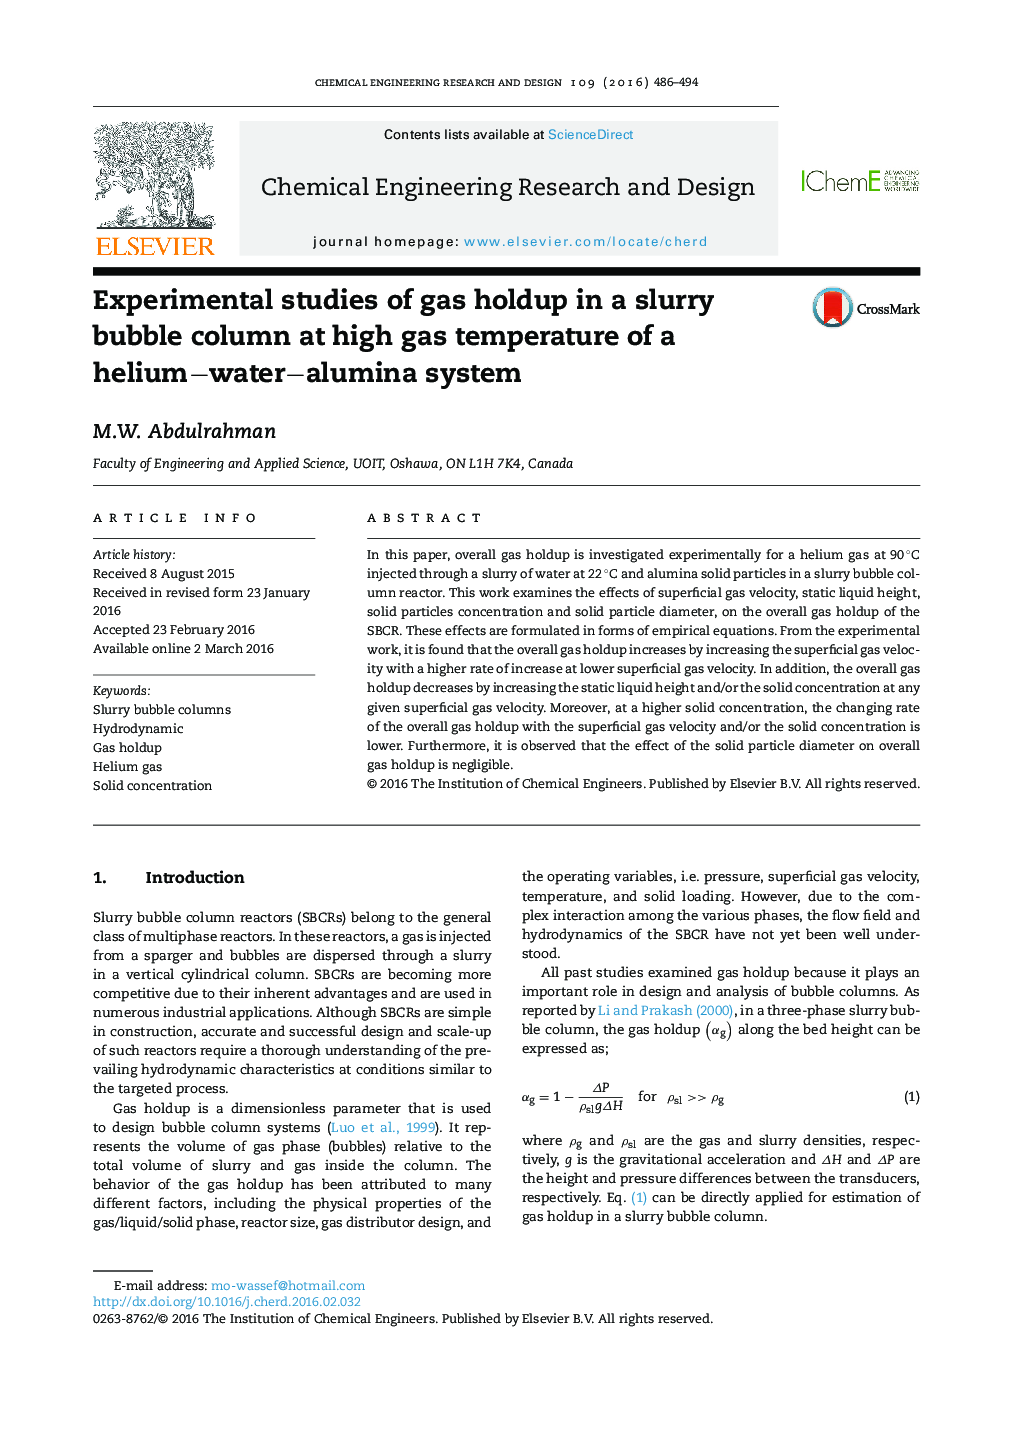 Experimental studies of gas holdup in a slurry bubble column at high gas temperature of a heliumâwaterâalumina system